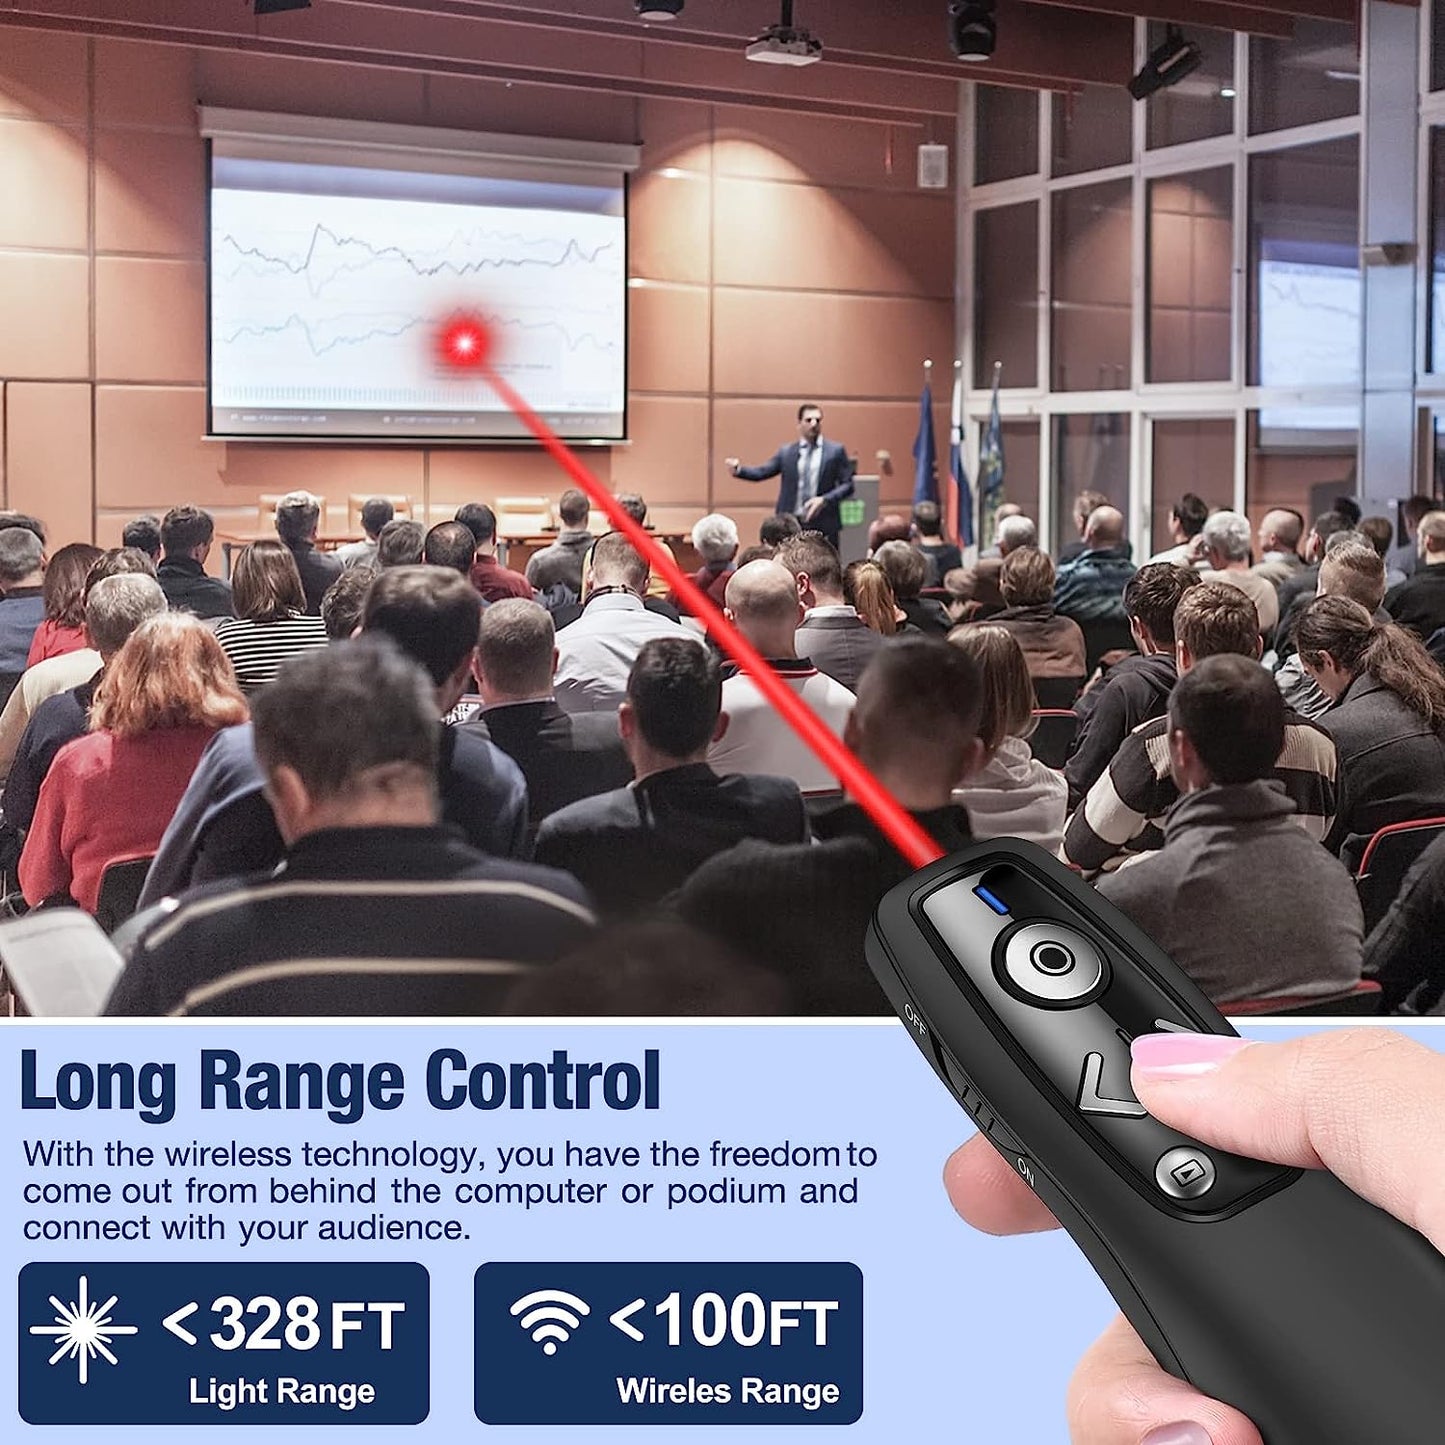 Wireless PowerPoint Clicker with Hyperlink, Volume Control, and Red Light - Professional Presentation Remote Slide Advancer for Mac, PC, and Laptop